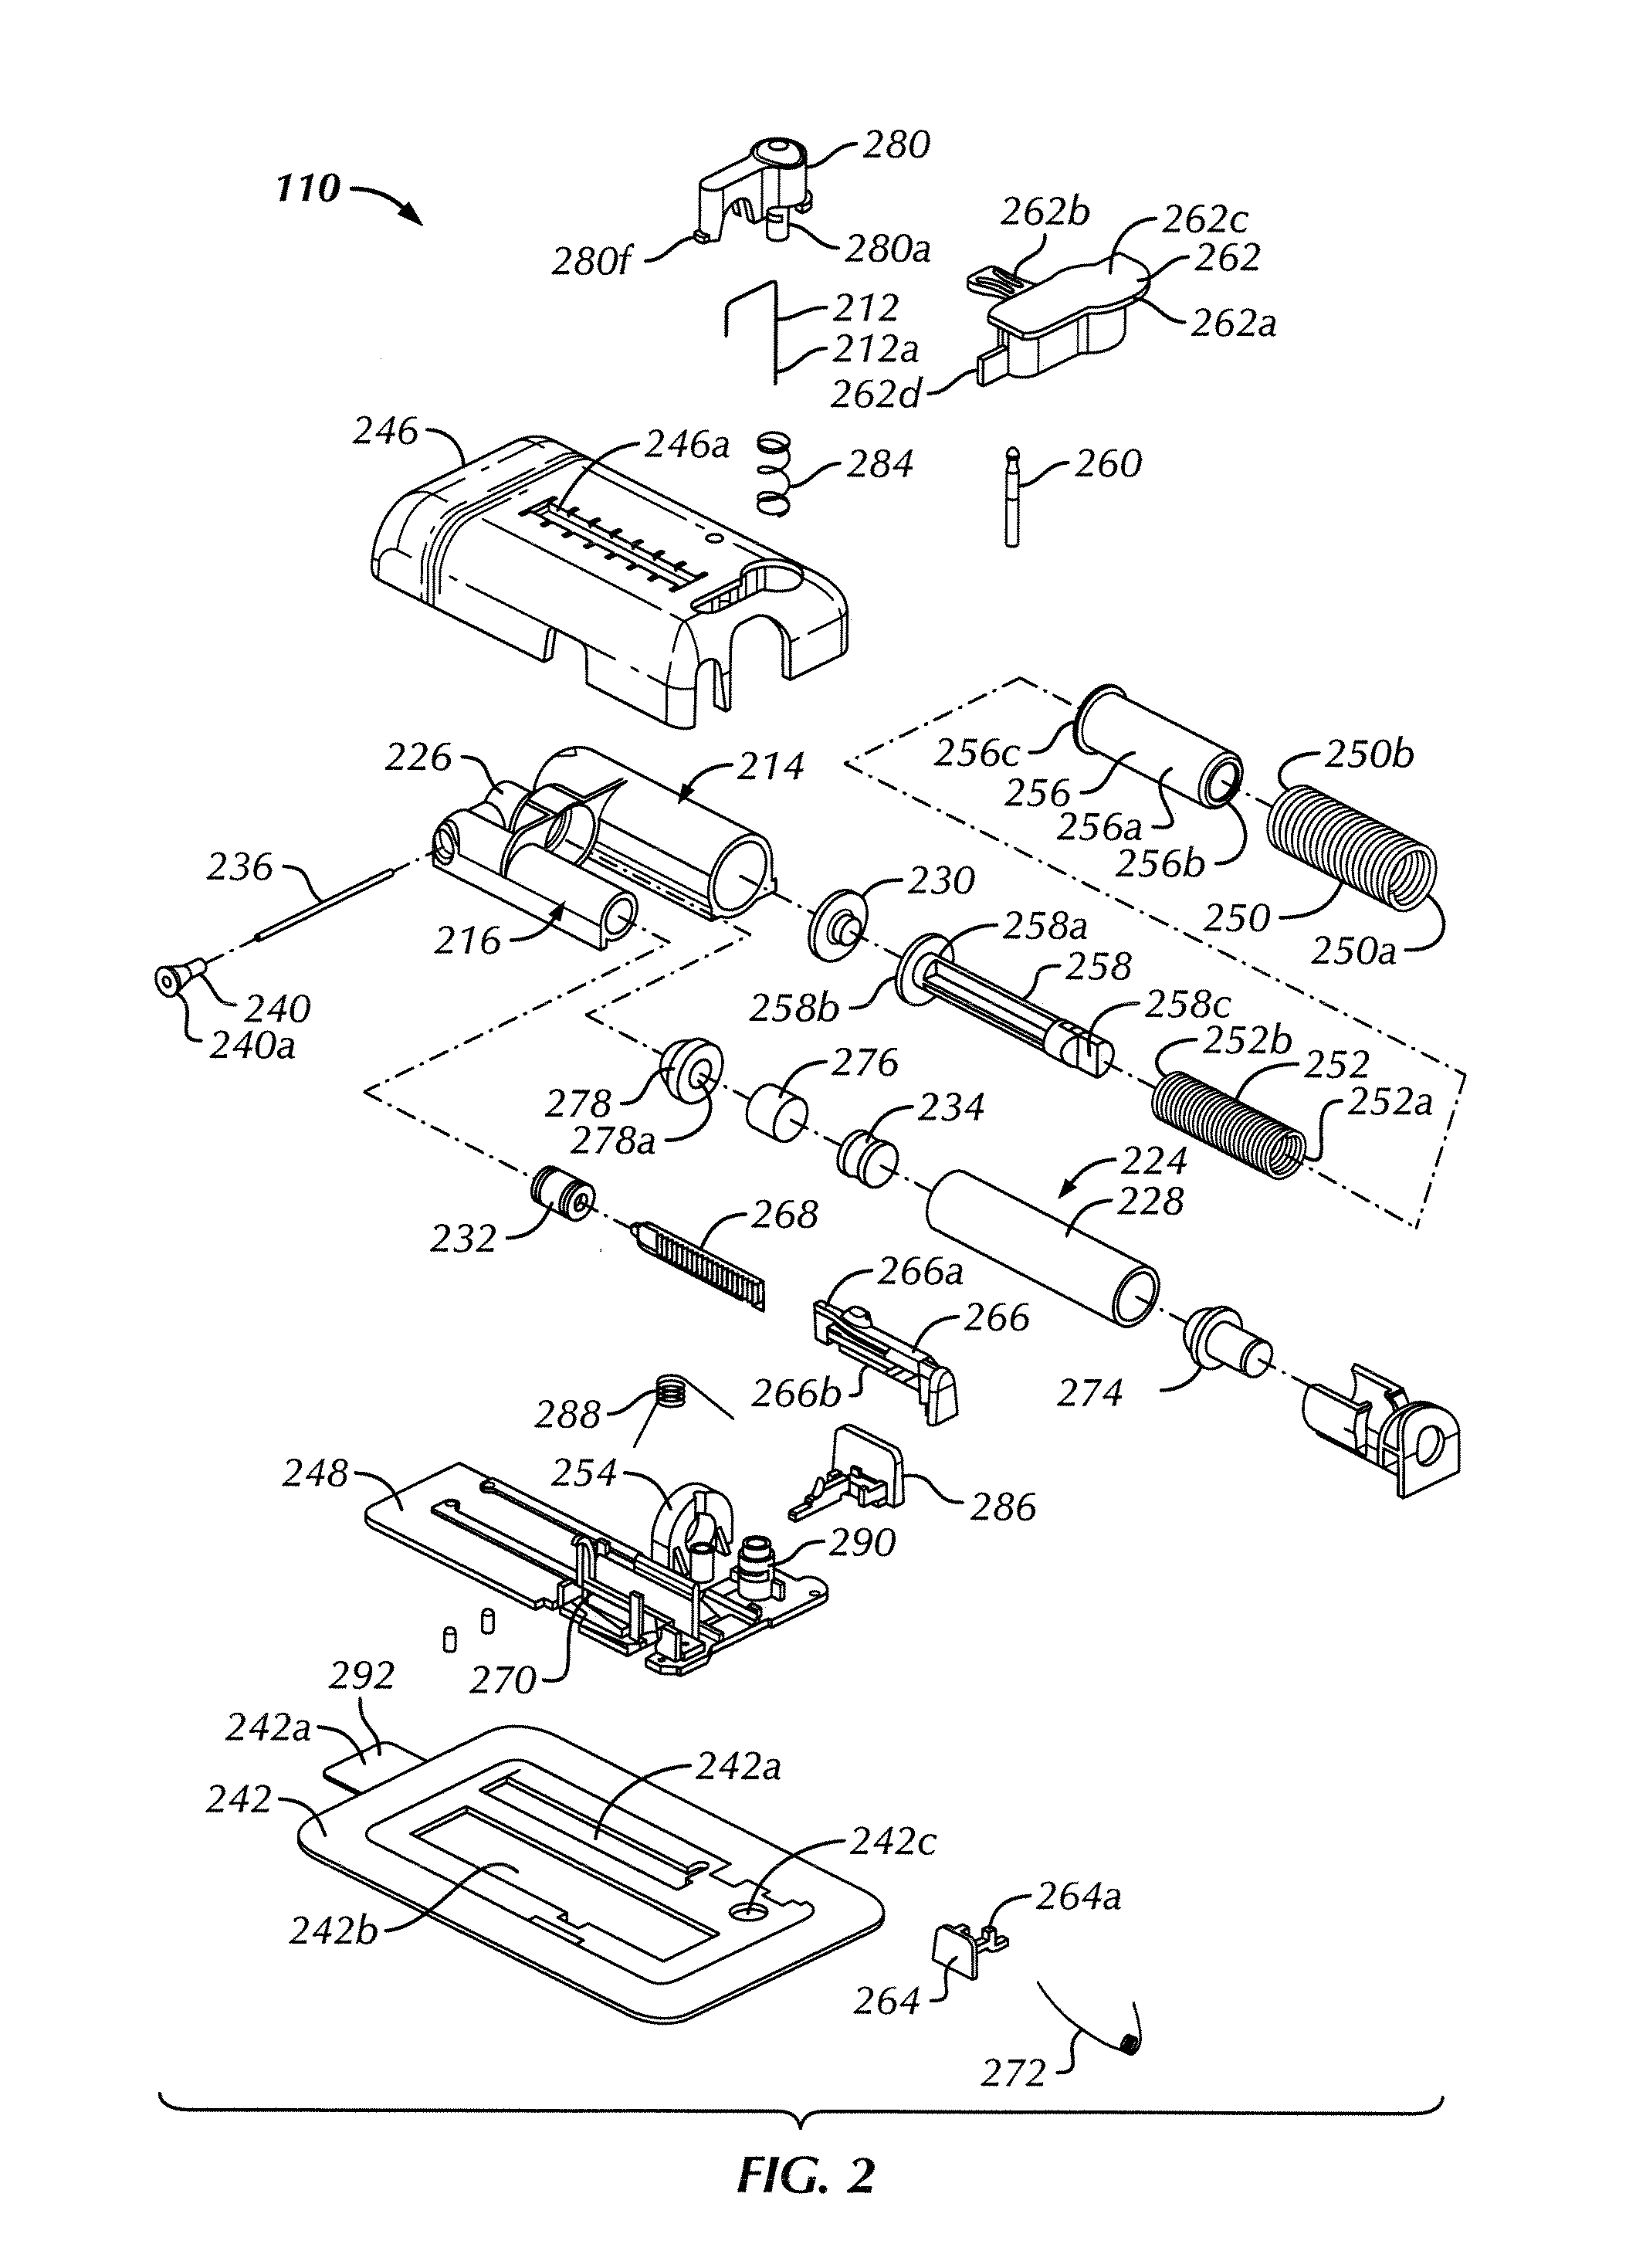 Fluid Delivery Device Needle Retraction Mechanisms, Cartridges and Expandable Hydraulic Fluid Seals